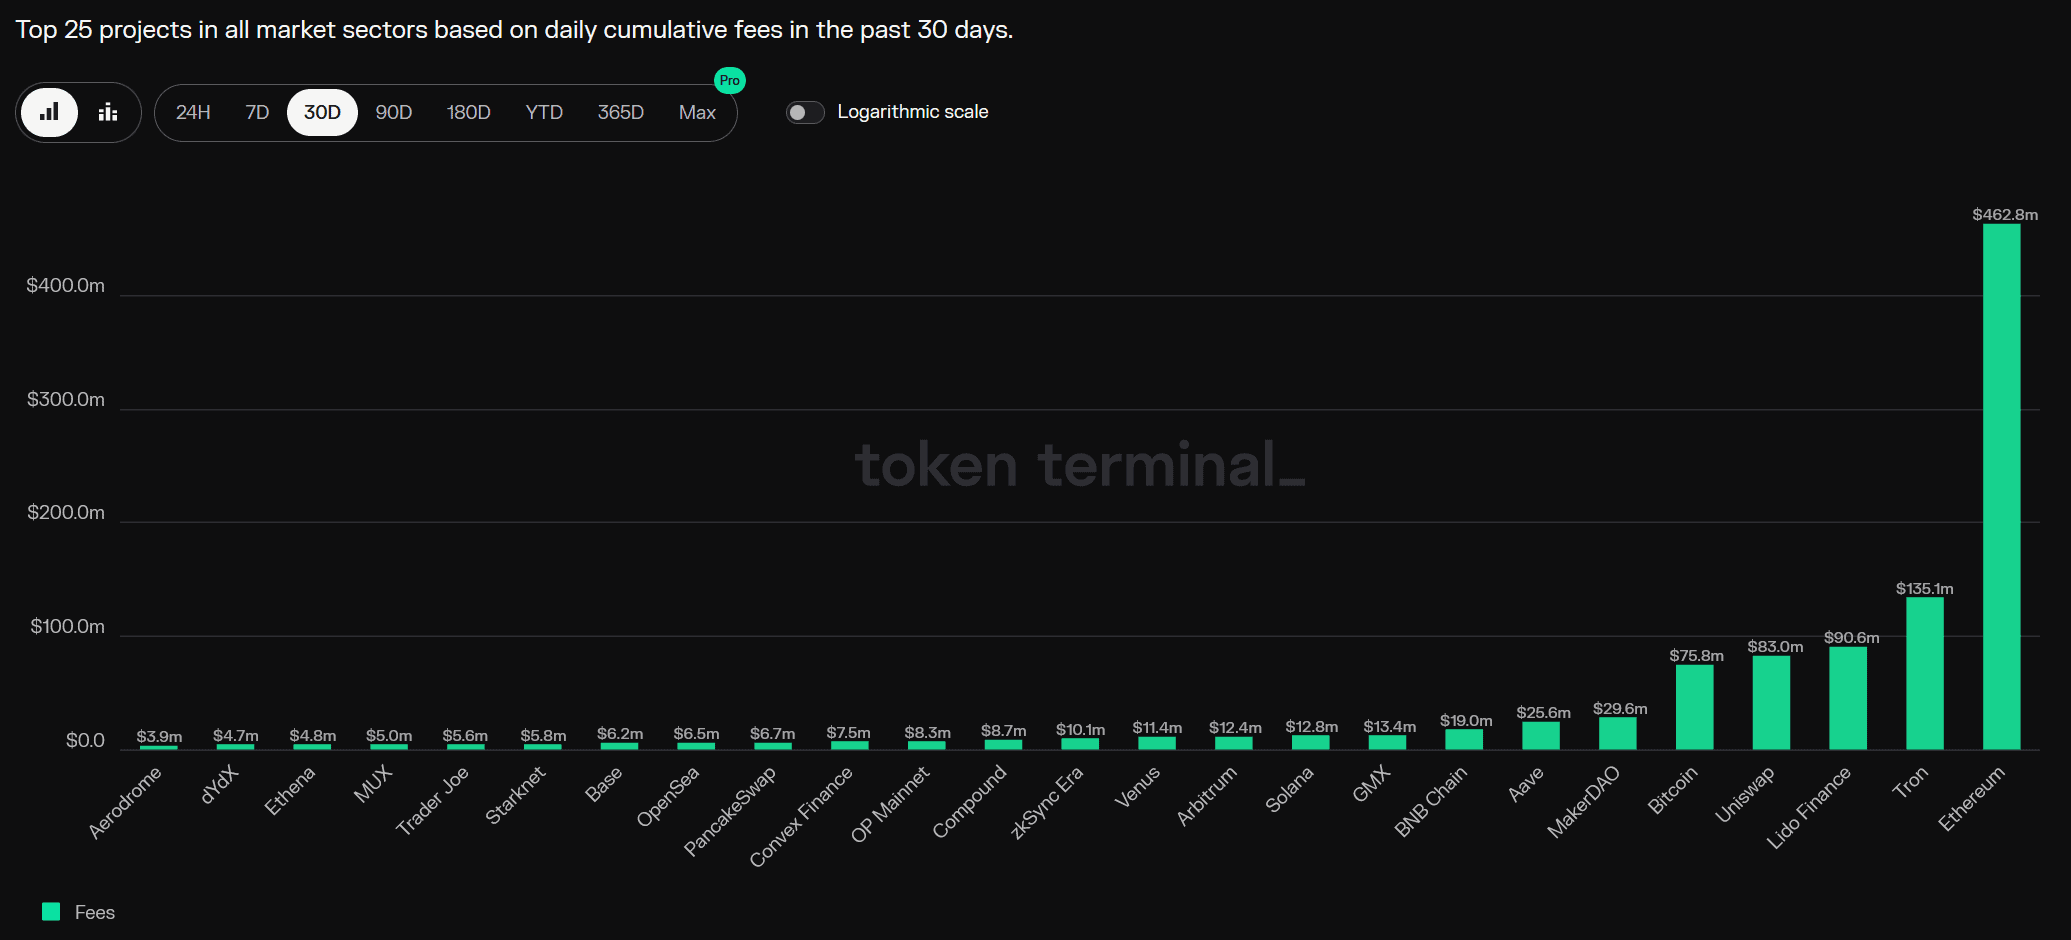 Earnings of the largest blockchain networks over the last 30 days.  Source: TokenTerminal